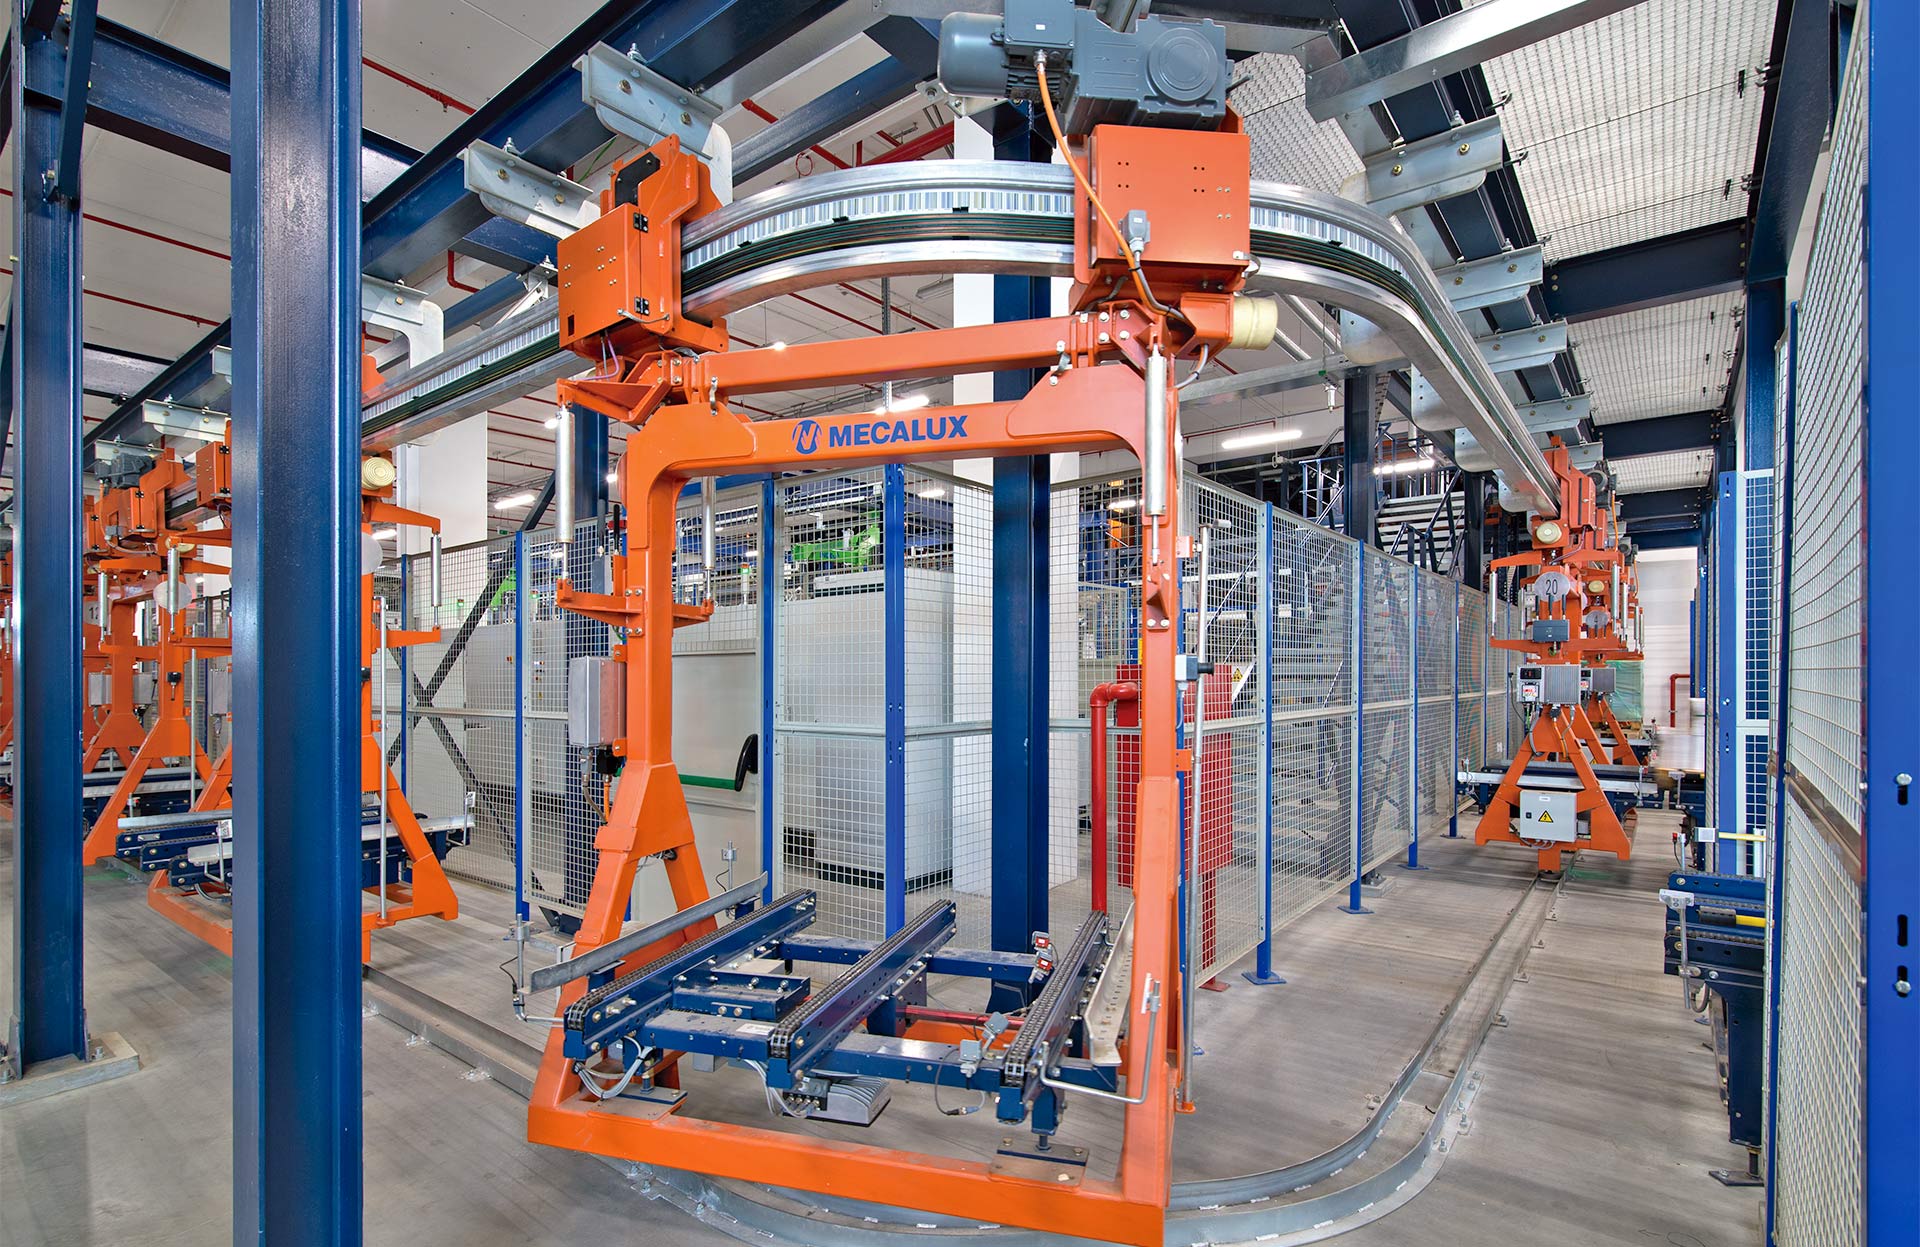 The circuits of the electric monorail system can be adapted to the characteristics of each warehouse